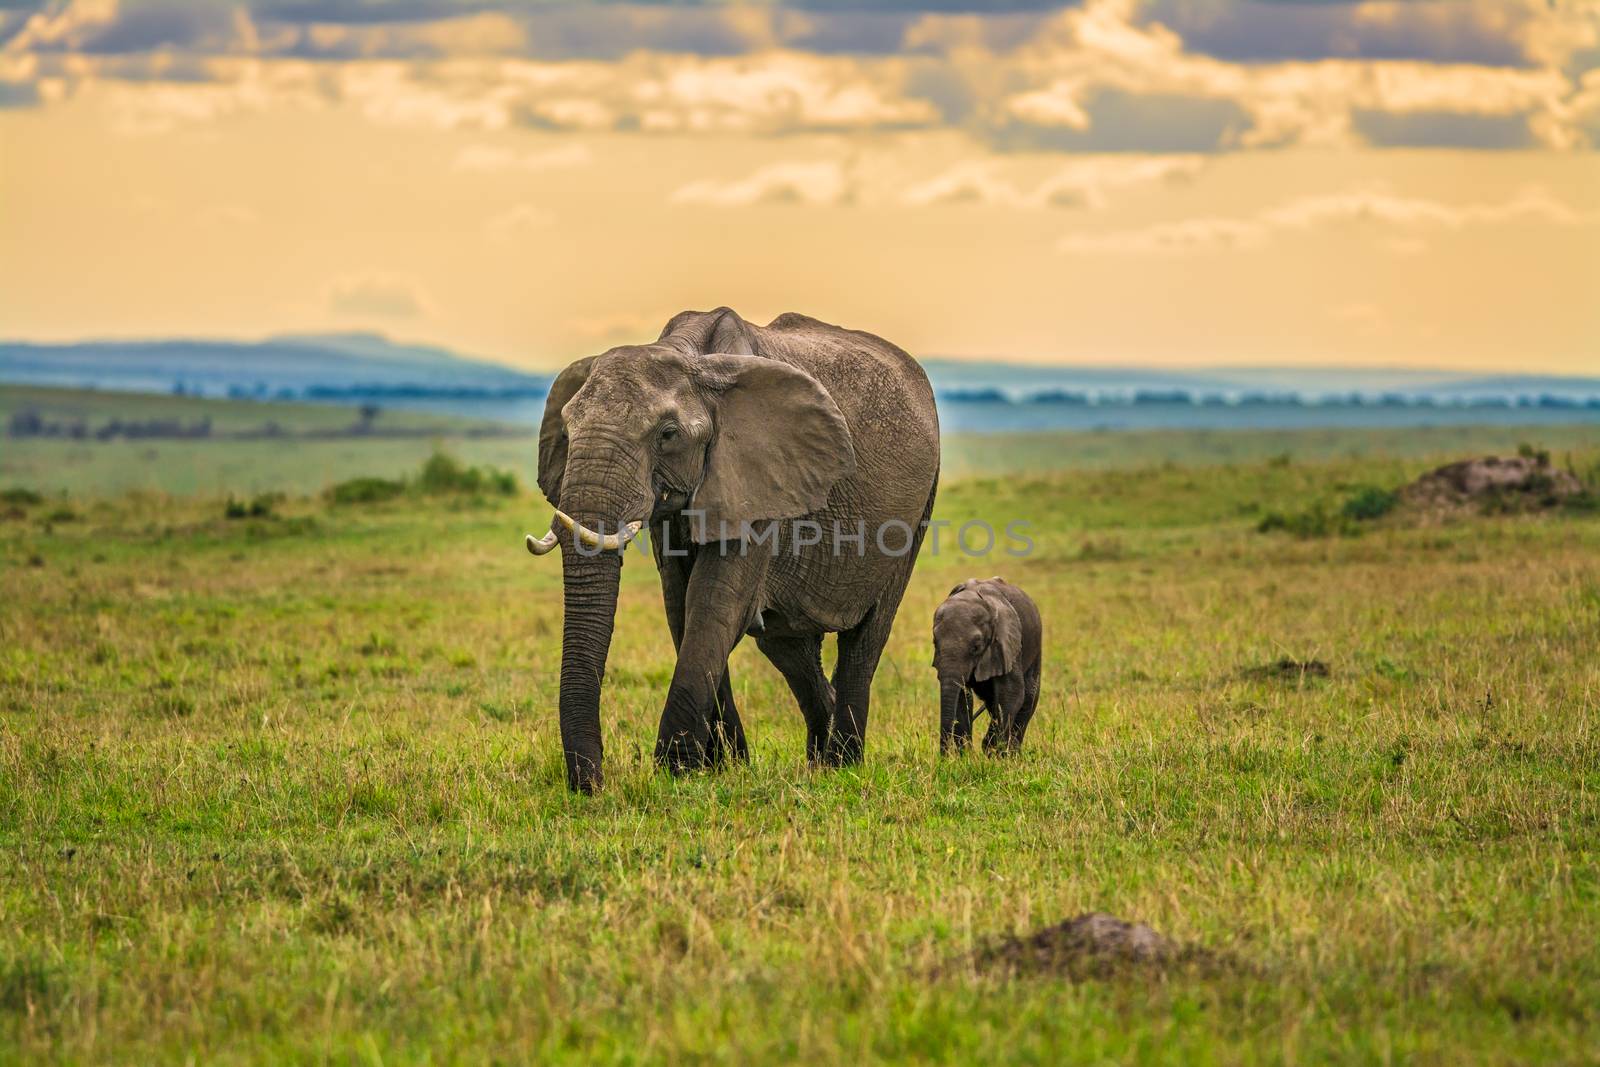 Mother elephant with a baby by nickfox